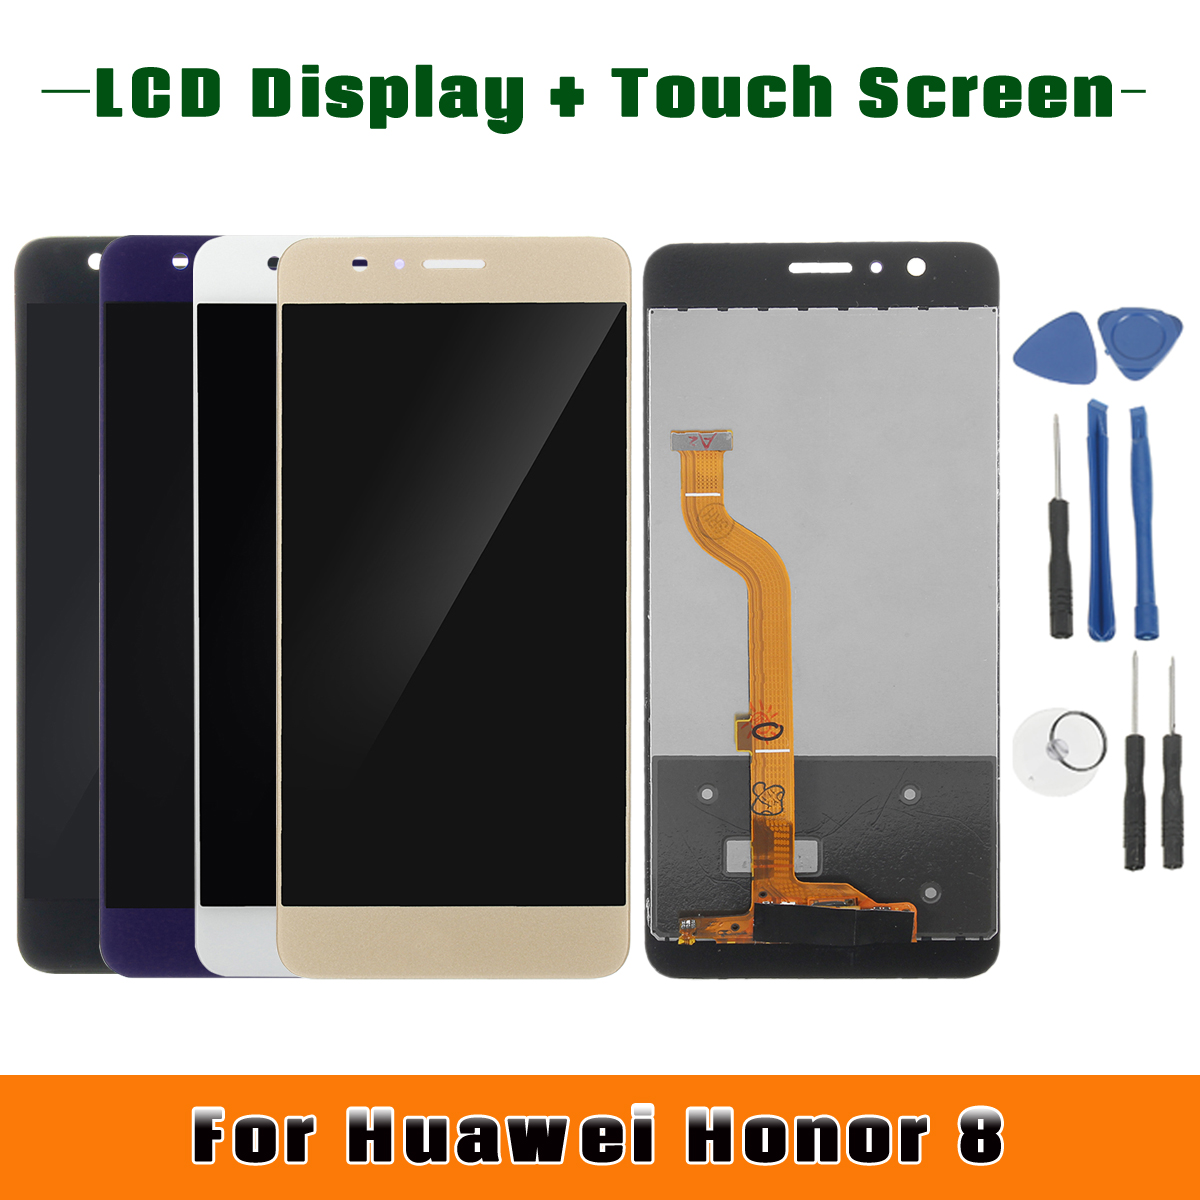 LCD-DisplayTouch-Screen-Digitizer-Assembly-Replacement-With-Tools-For-Huawei-Honor-8-1238995